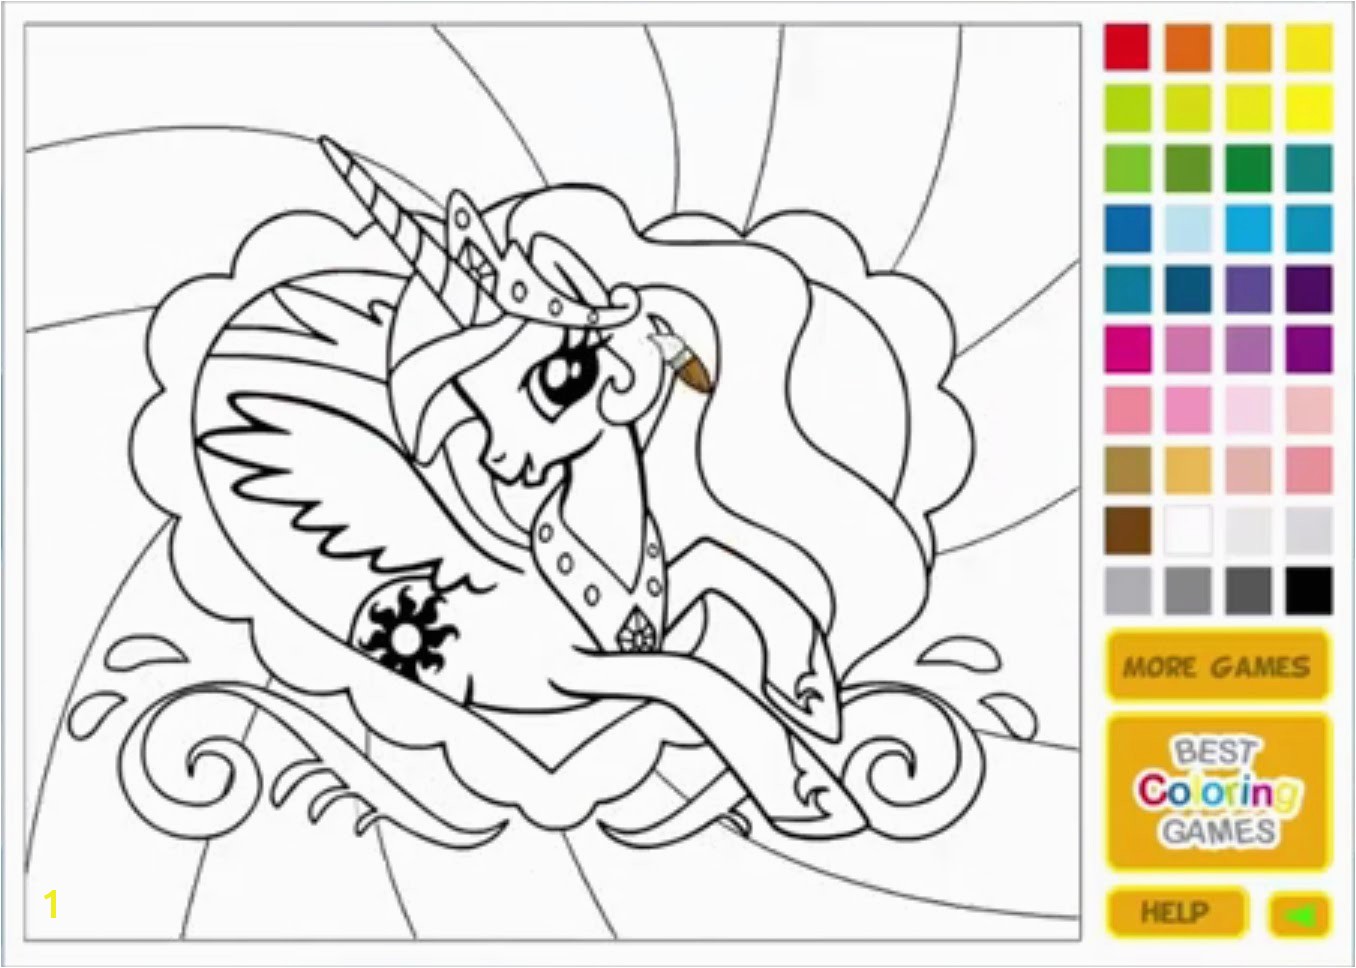 New line Coloring Book More Image Ideas